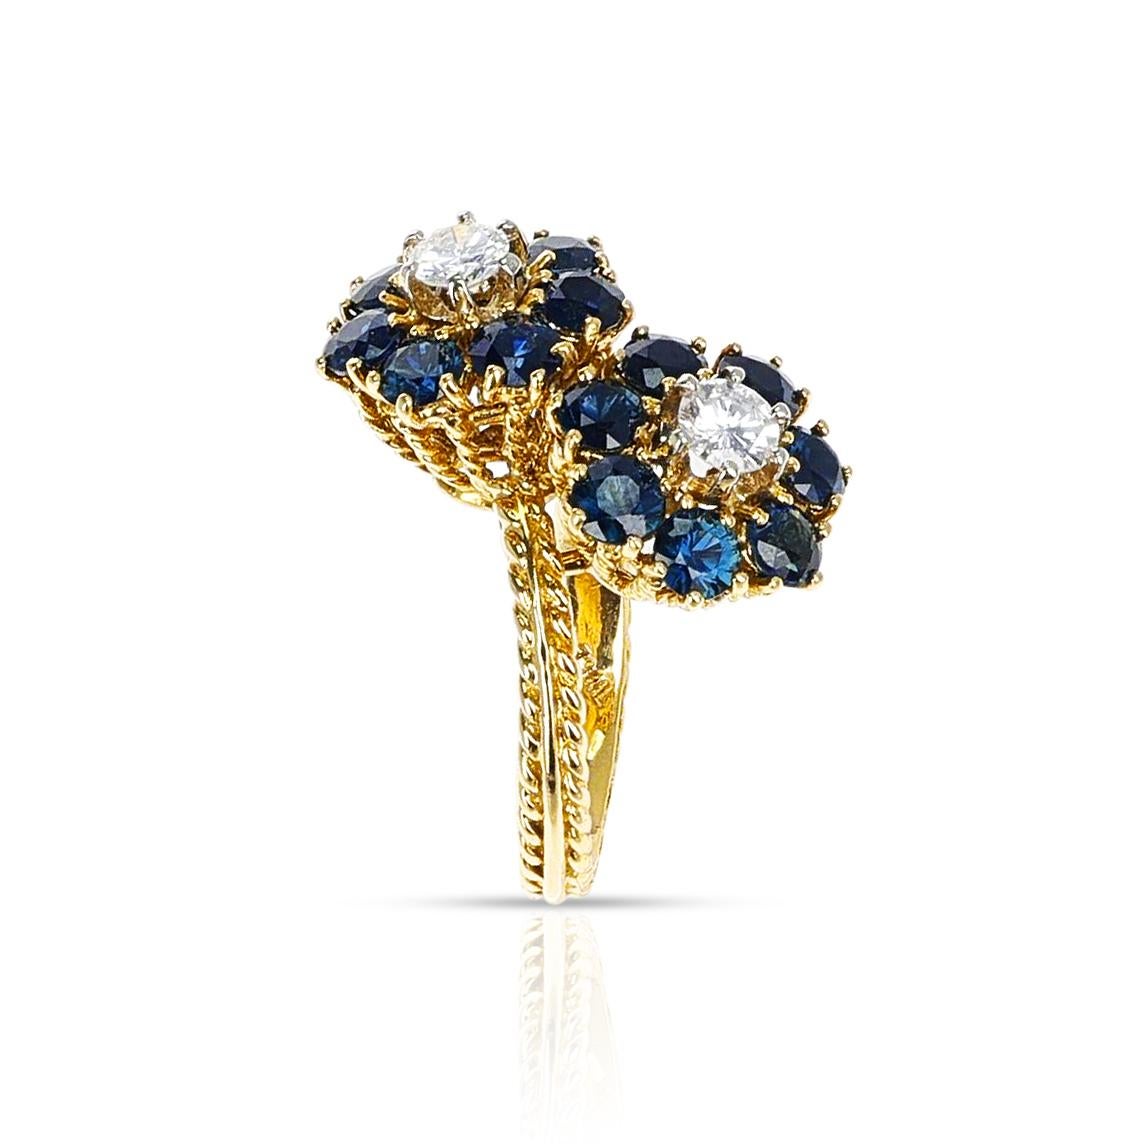  A beautiful Double Floral Sapphire and Diamond Ring made with 18 Karat Ropework Yellow Gold. The diamonds weigh appx. 0.60 carats. The total weight is 8.60 grams. The ring size is US 5.50. 